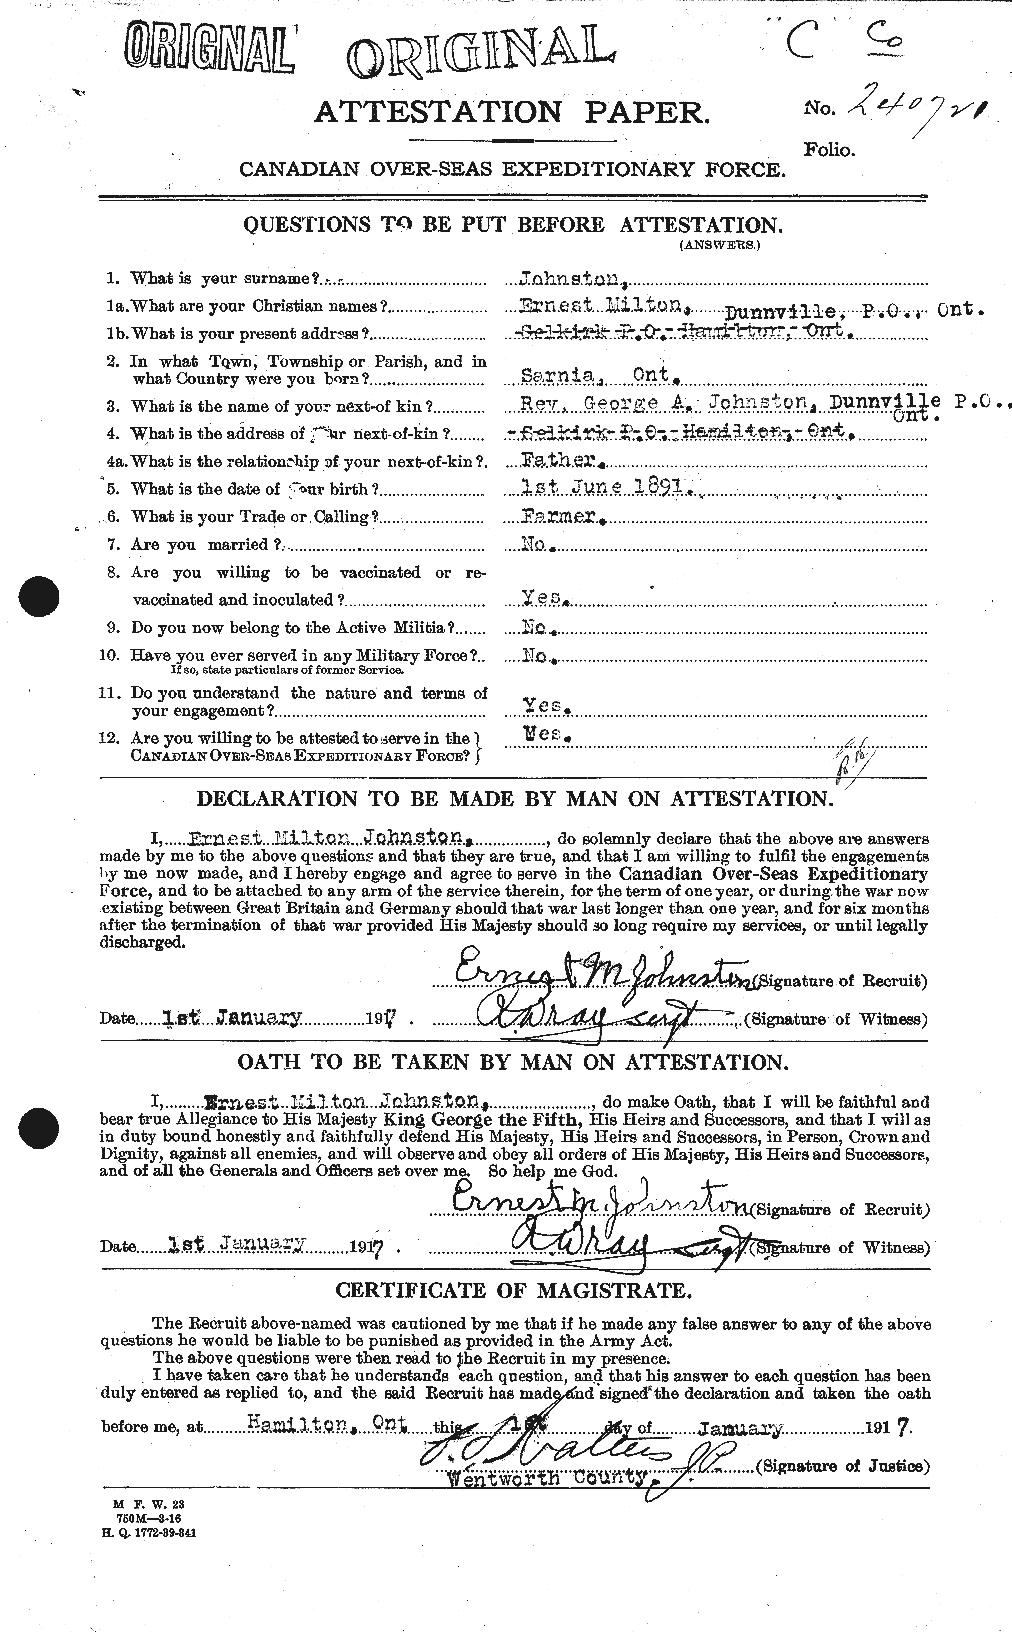 Personnel Records of the First World War - CEF 423247a